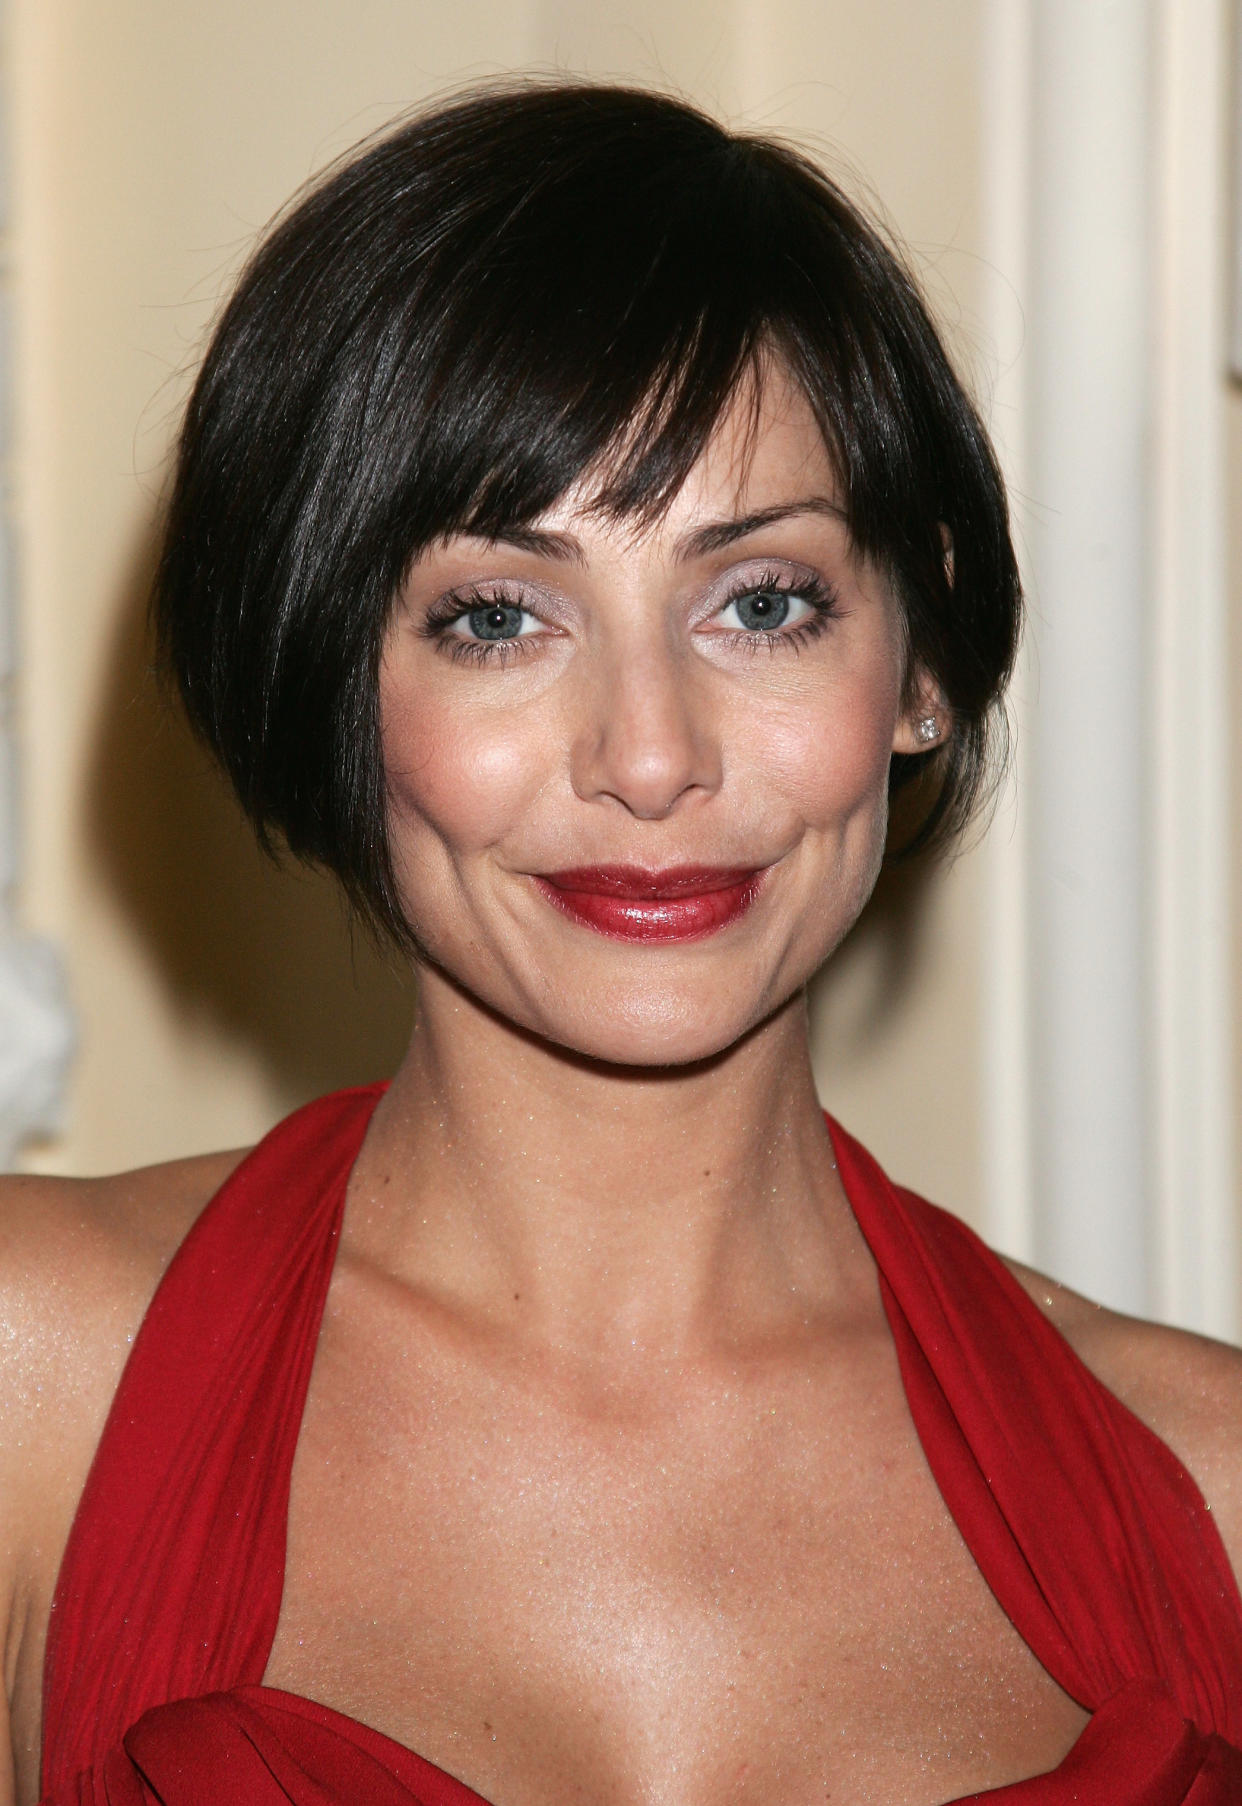 Natalie Imbruglia  (Photo by Chris Jackson/Getty Images)